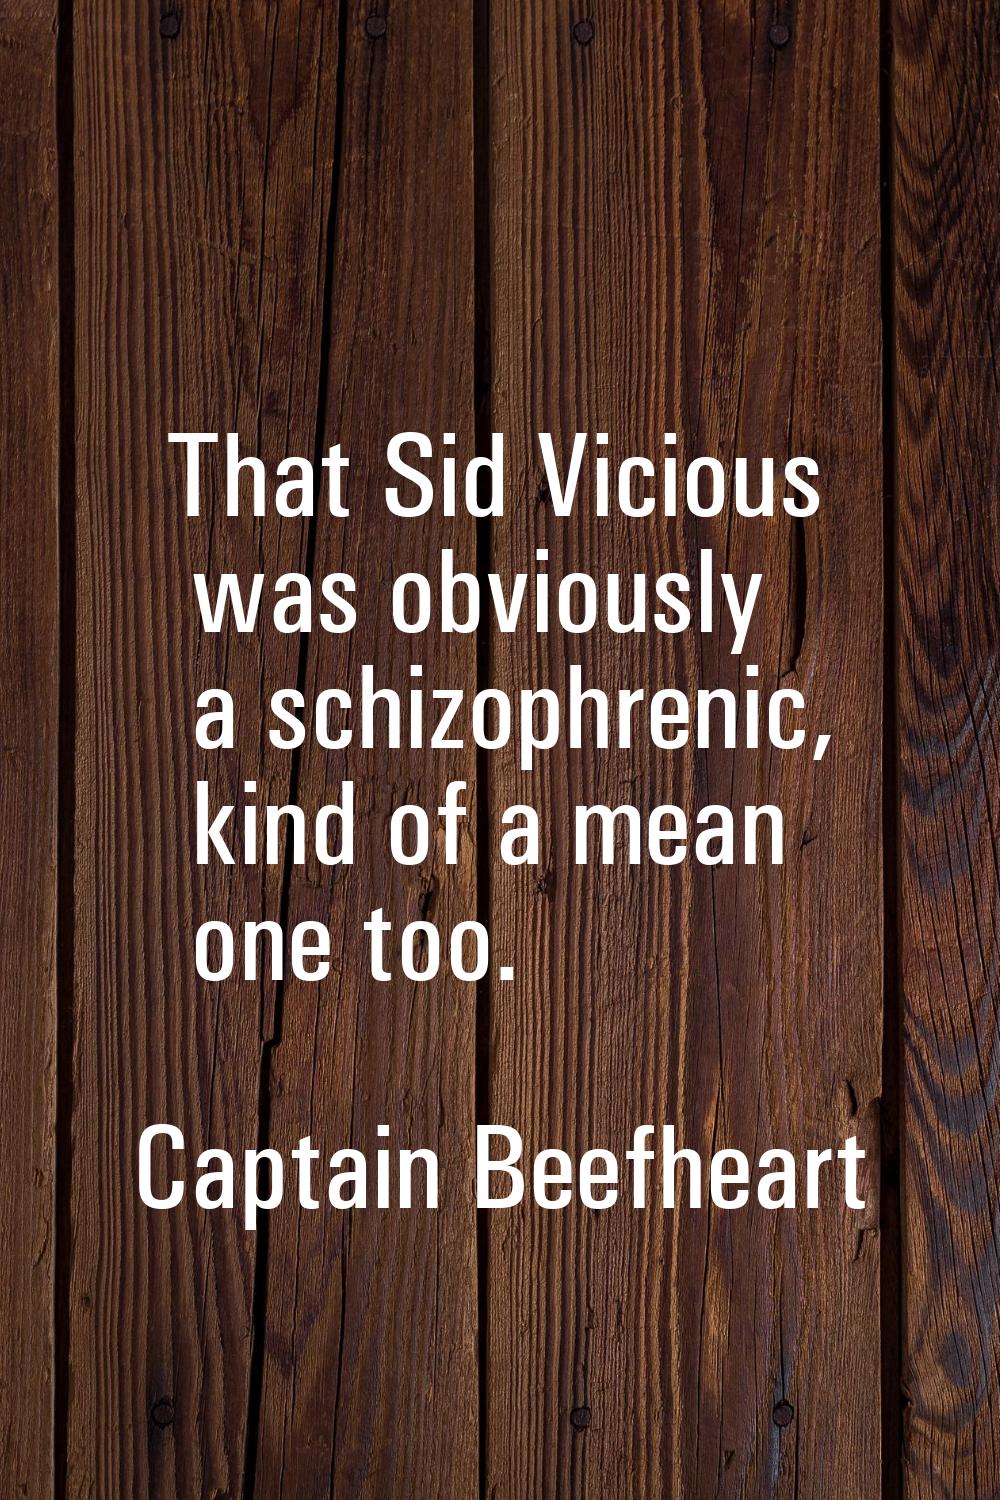 That Sid Vicious was obviously a schizophrenic, kind of a mean one too.